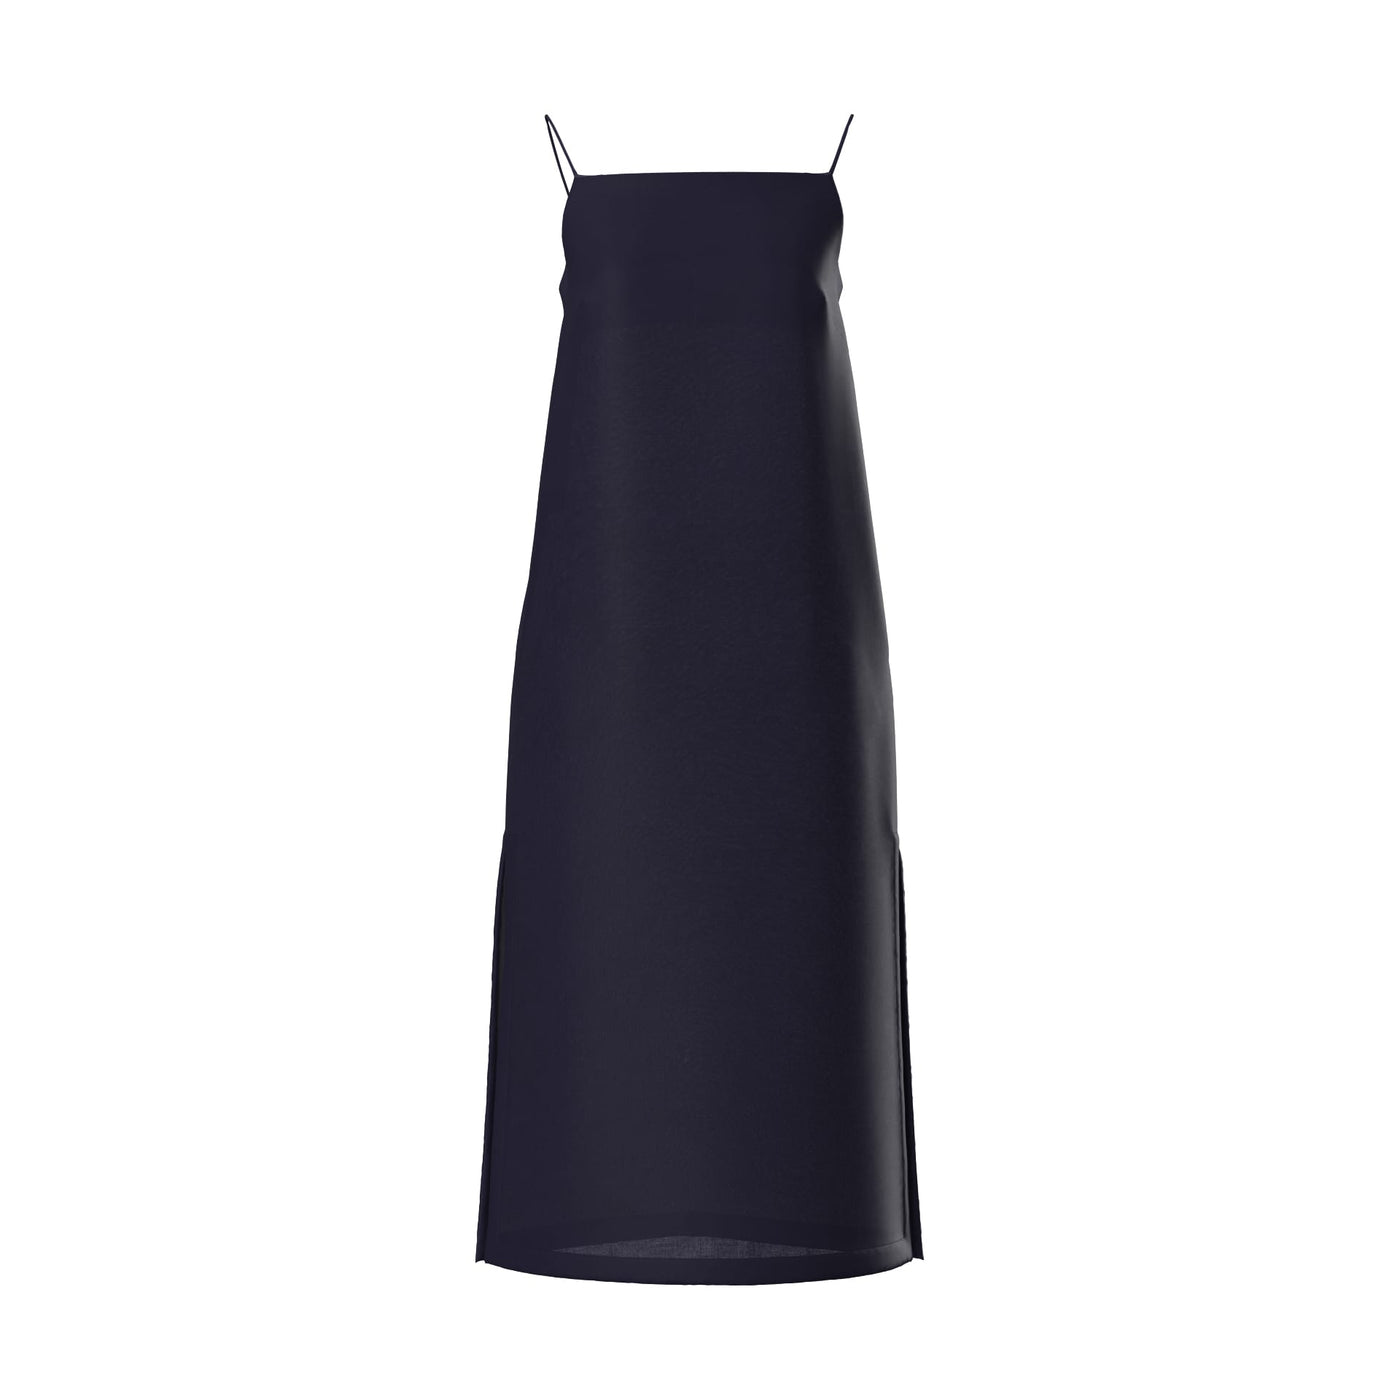 Lilly Pilly Collection 100% organic linen Kai slip dress in Navy as 3d model showing front view